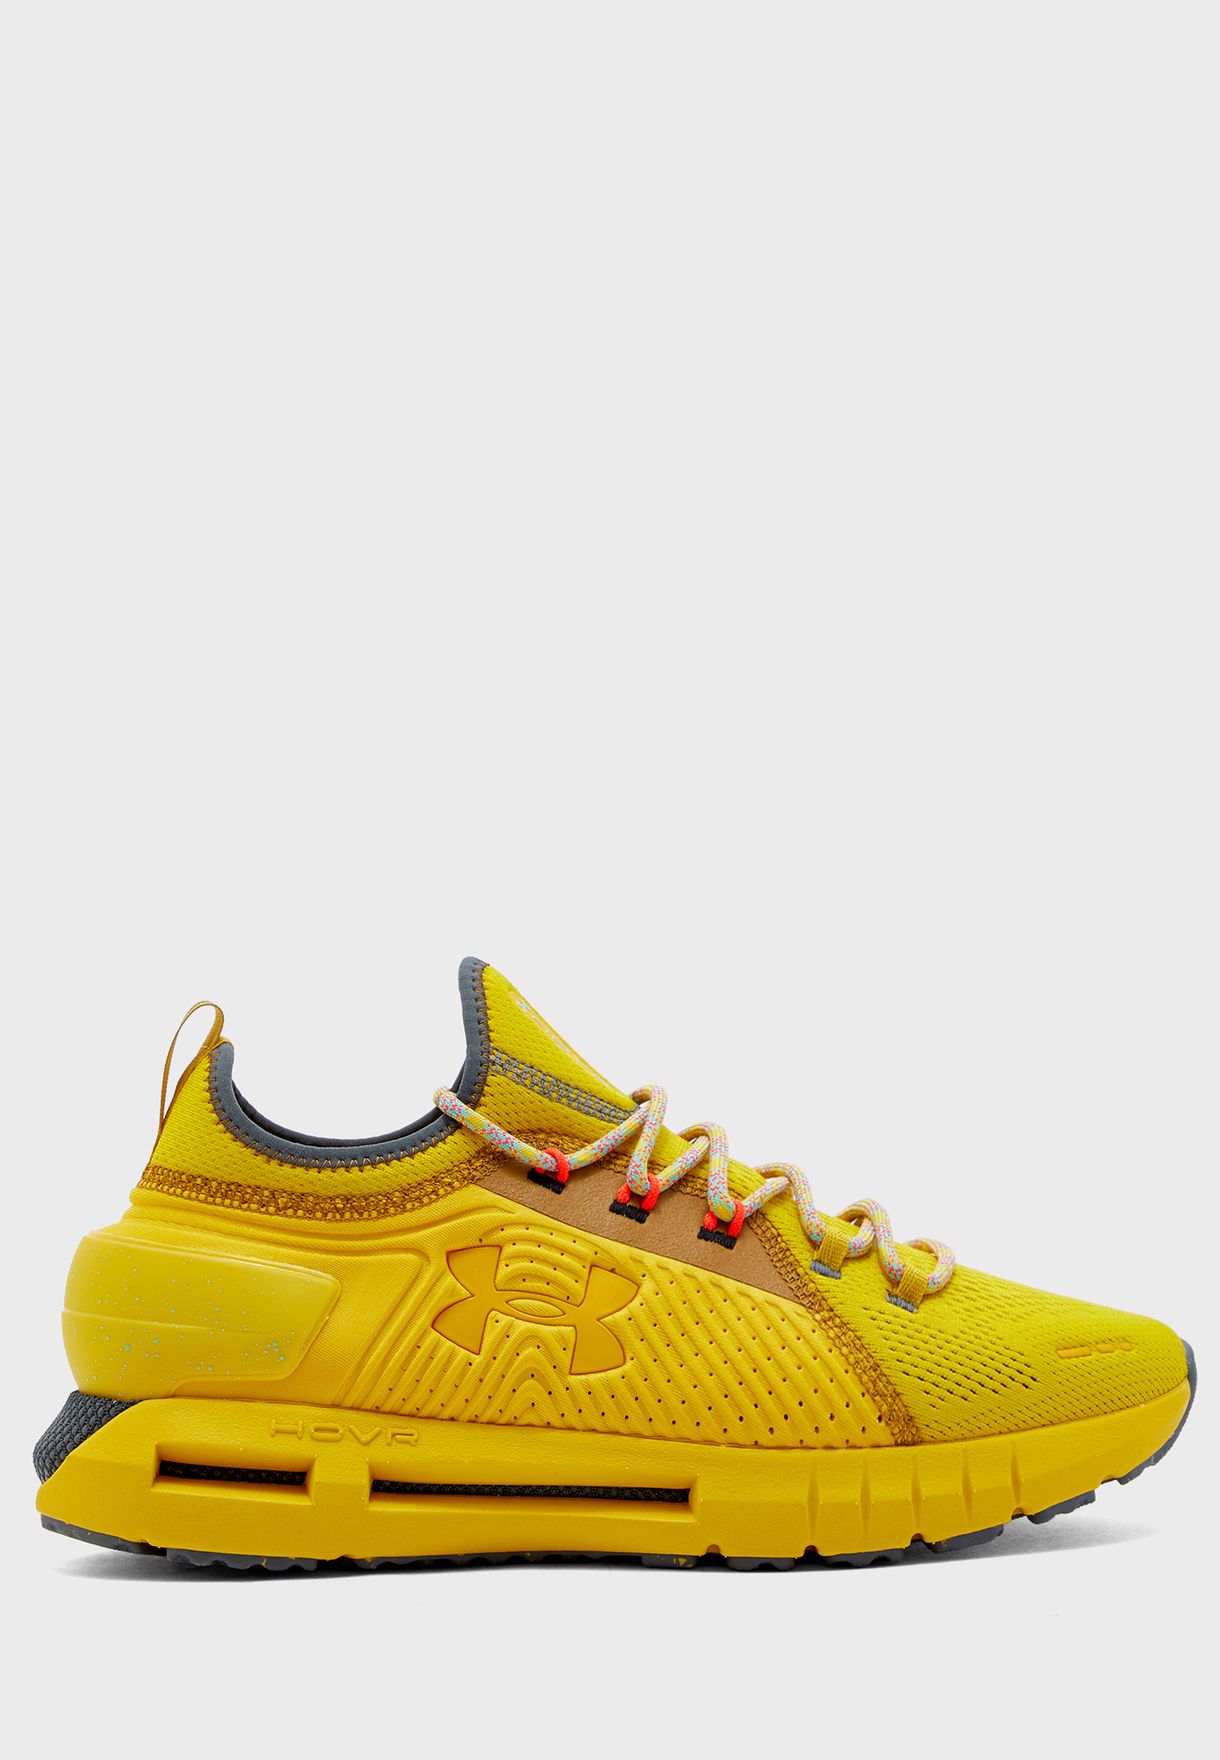 under armor hovr mens yellow